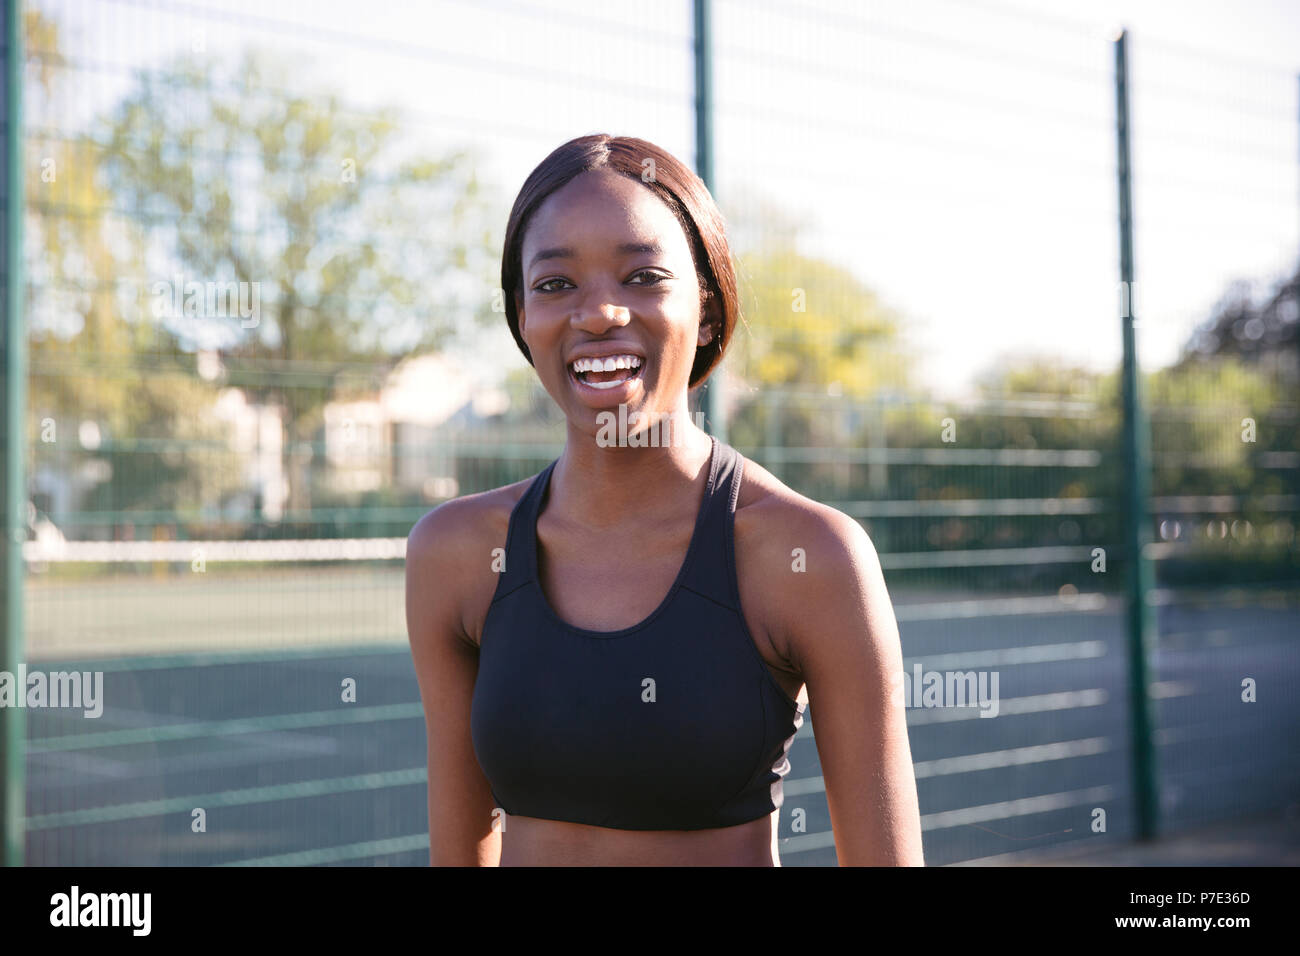 Young woman smiling in sports court Stock Photo